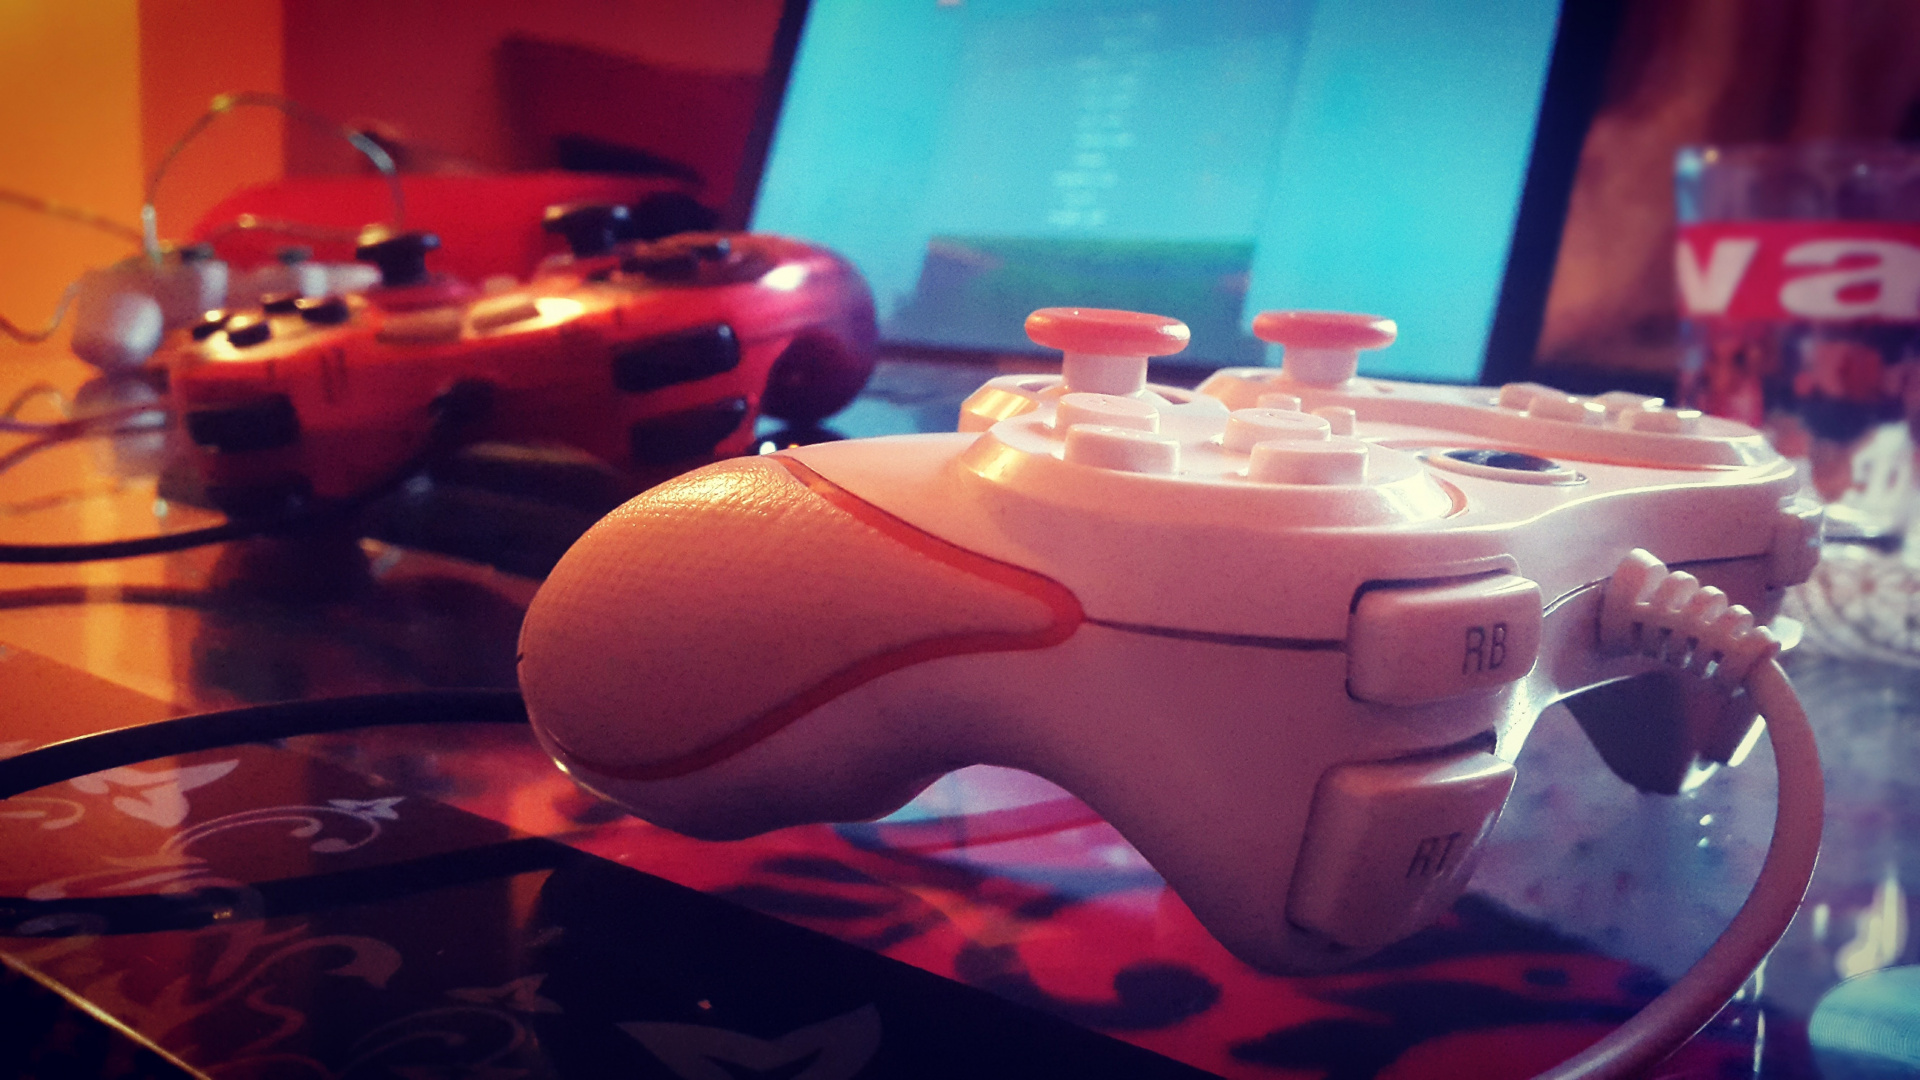 White Game Controller on Brown Wooden Table. Wallpaper in 1920x1080 Resolution